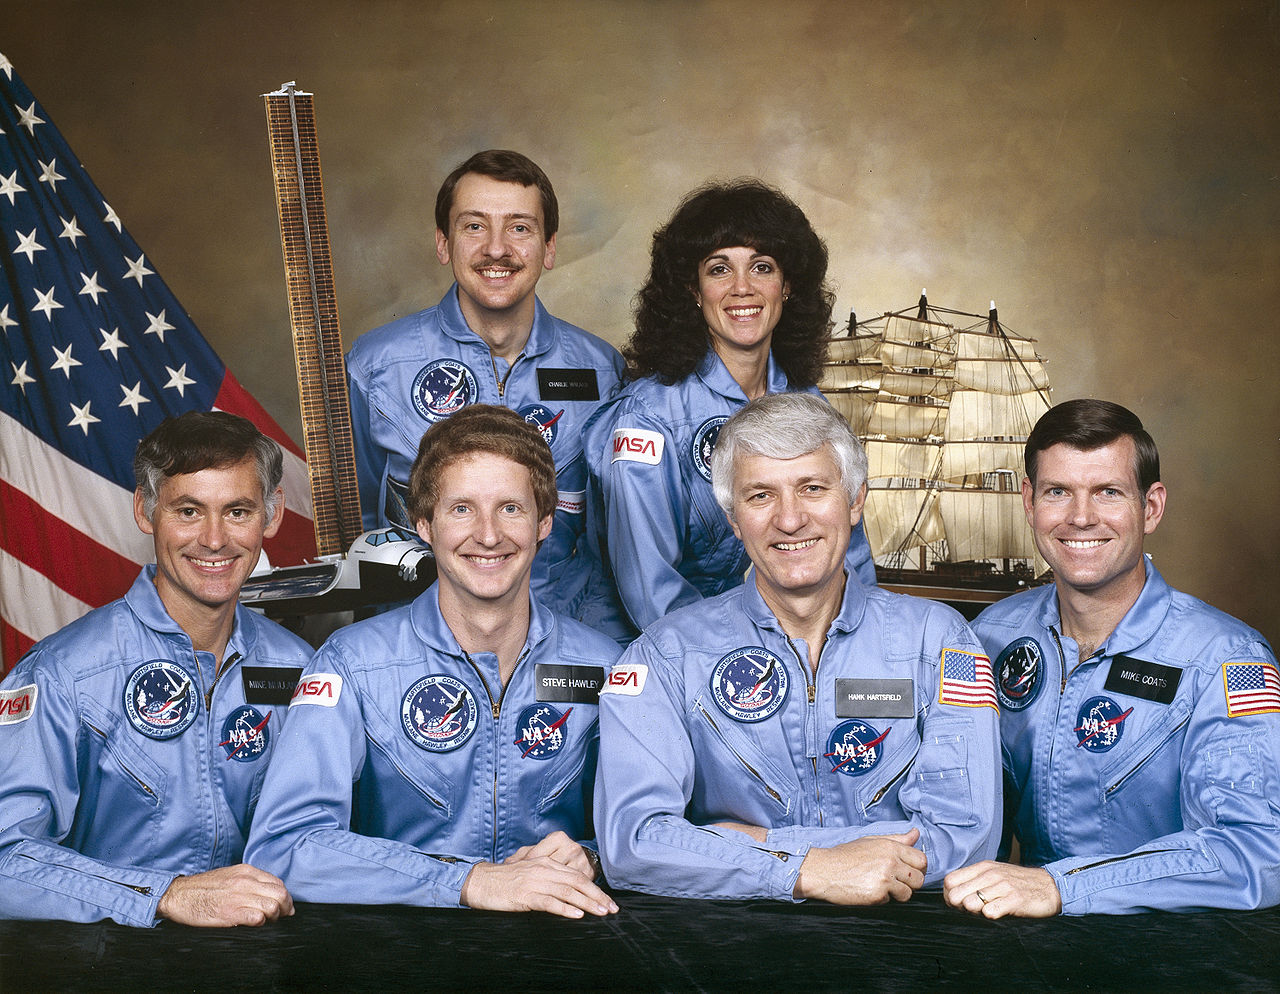 The crew of STS-41D - launched in August 1984 - boasted the commercial industry's first astronaut, Charles Walker. He is pictured at top left (next to Judith Resnik). At bottom, crew members Mike Mullane, Steve Hawley, Hank Hartsfield and Michael Coats smile for the camera. Photo Credit: NASA. 